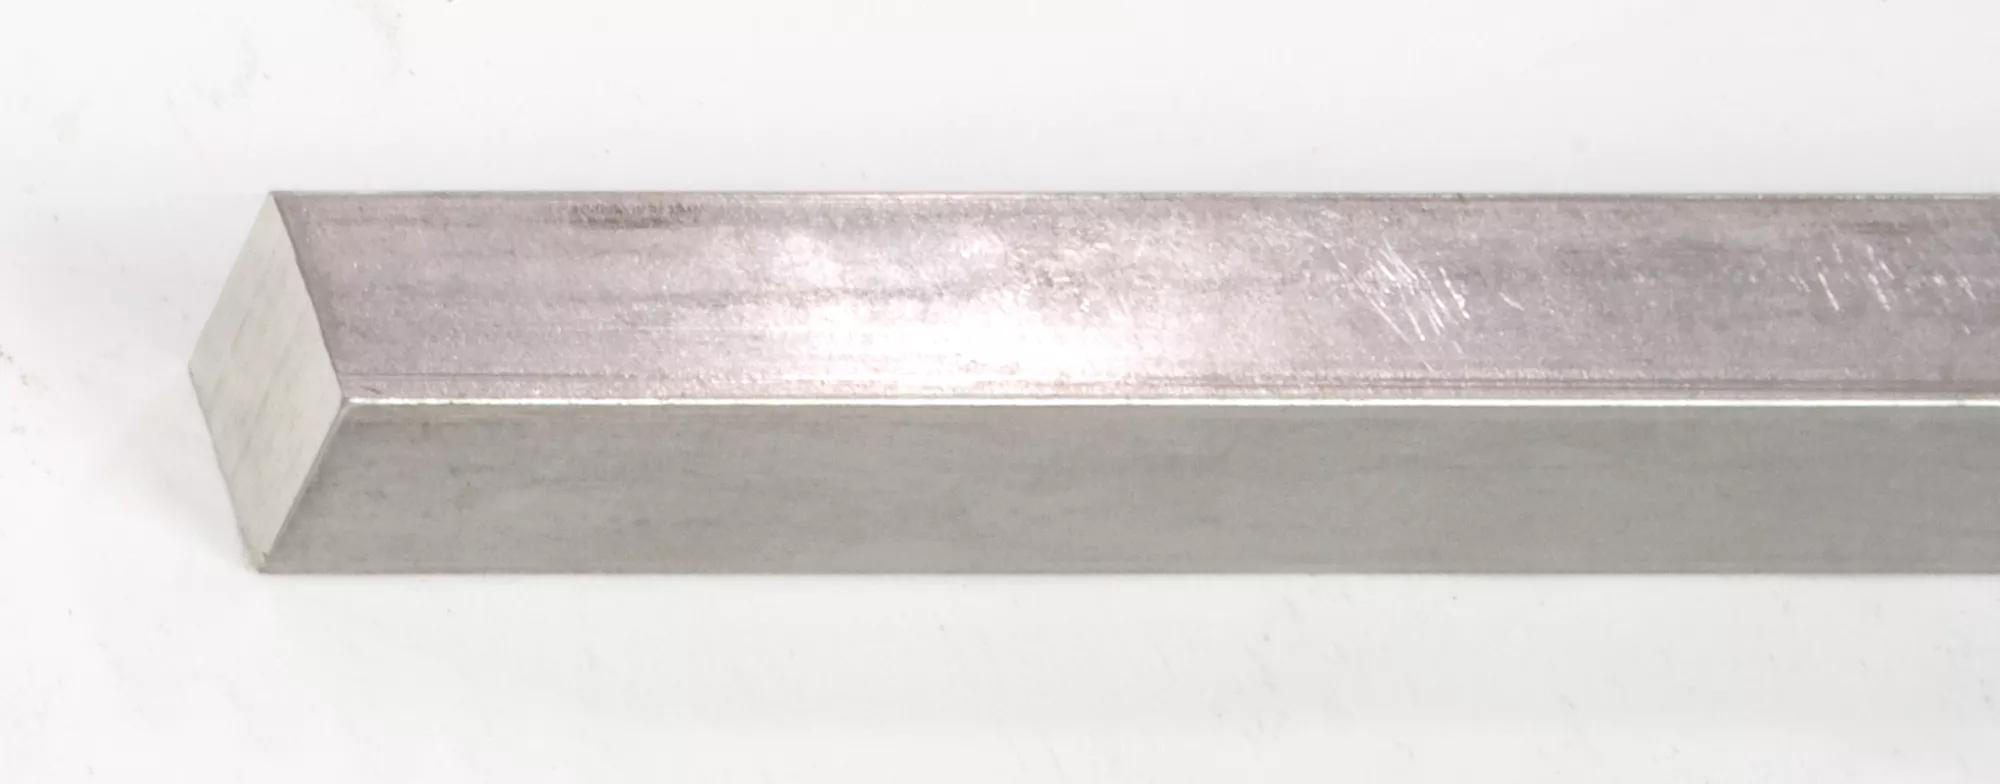 7/16" x 12" 300 Stainless Steel Square Keystock